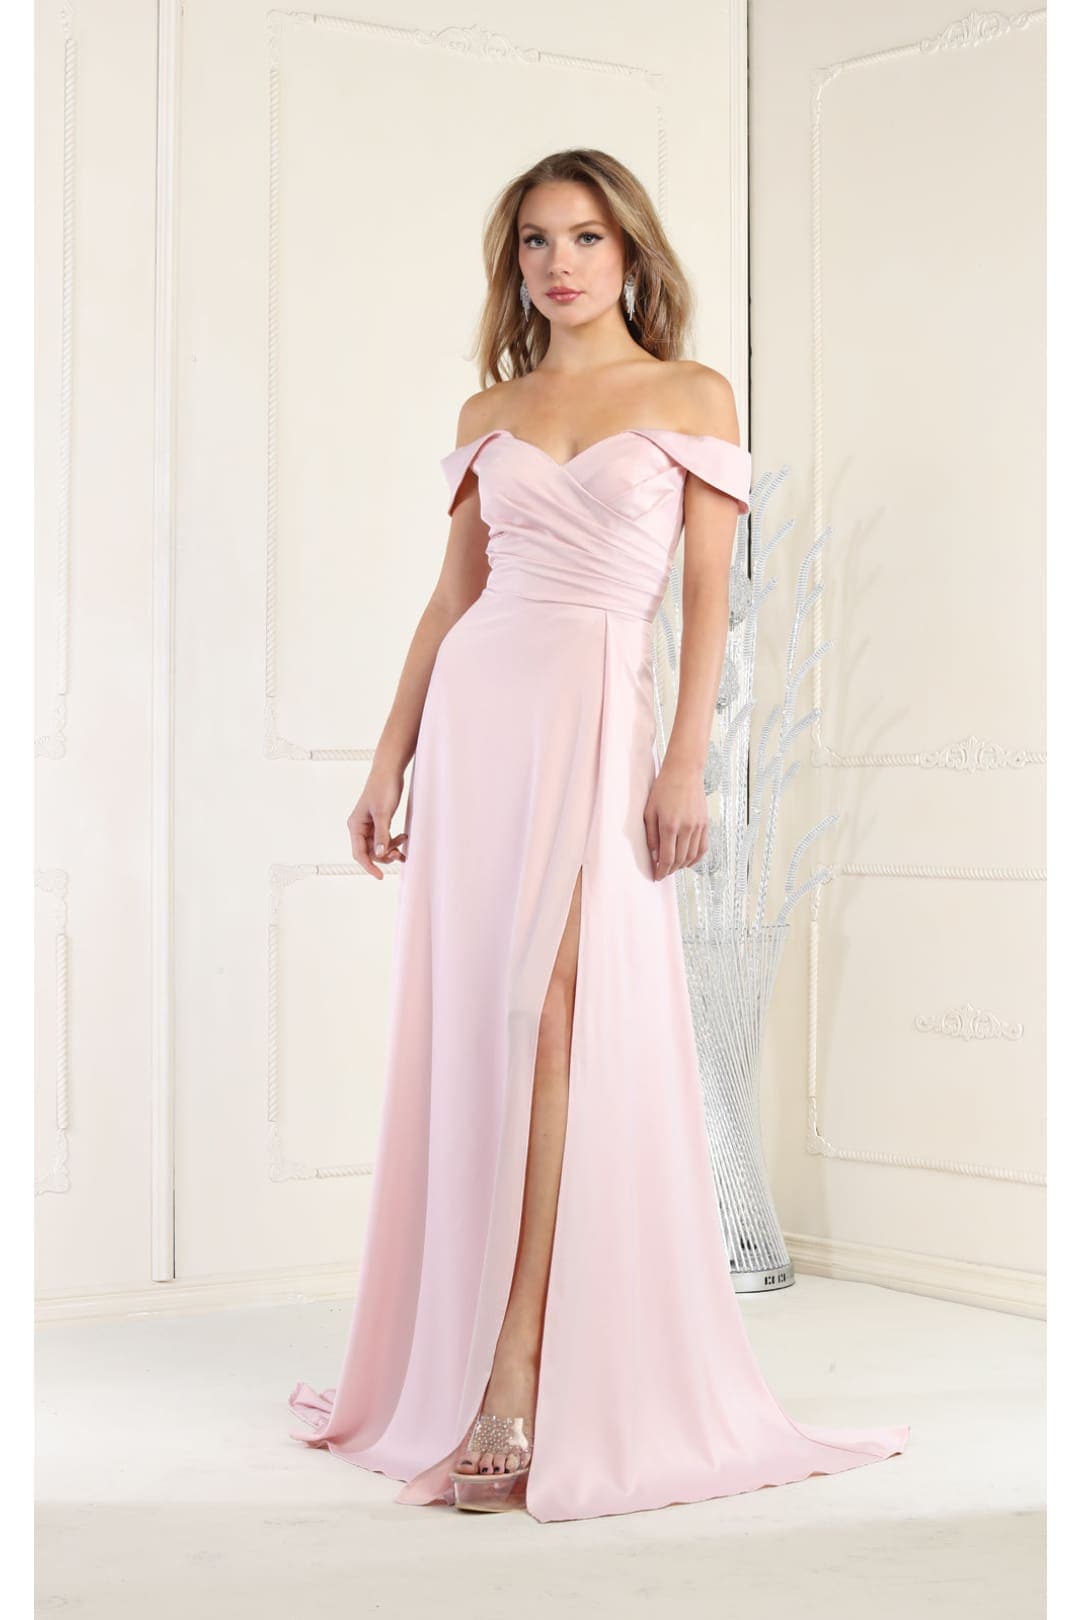 May Queen MQ1960 Off The Shoulder Prom Dress